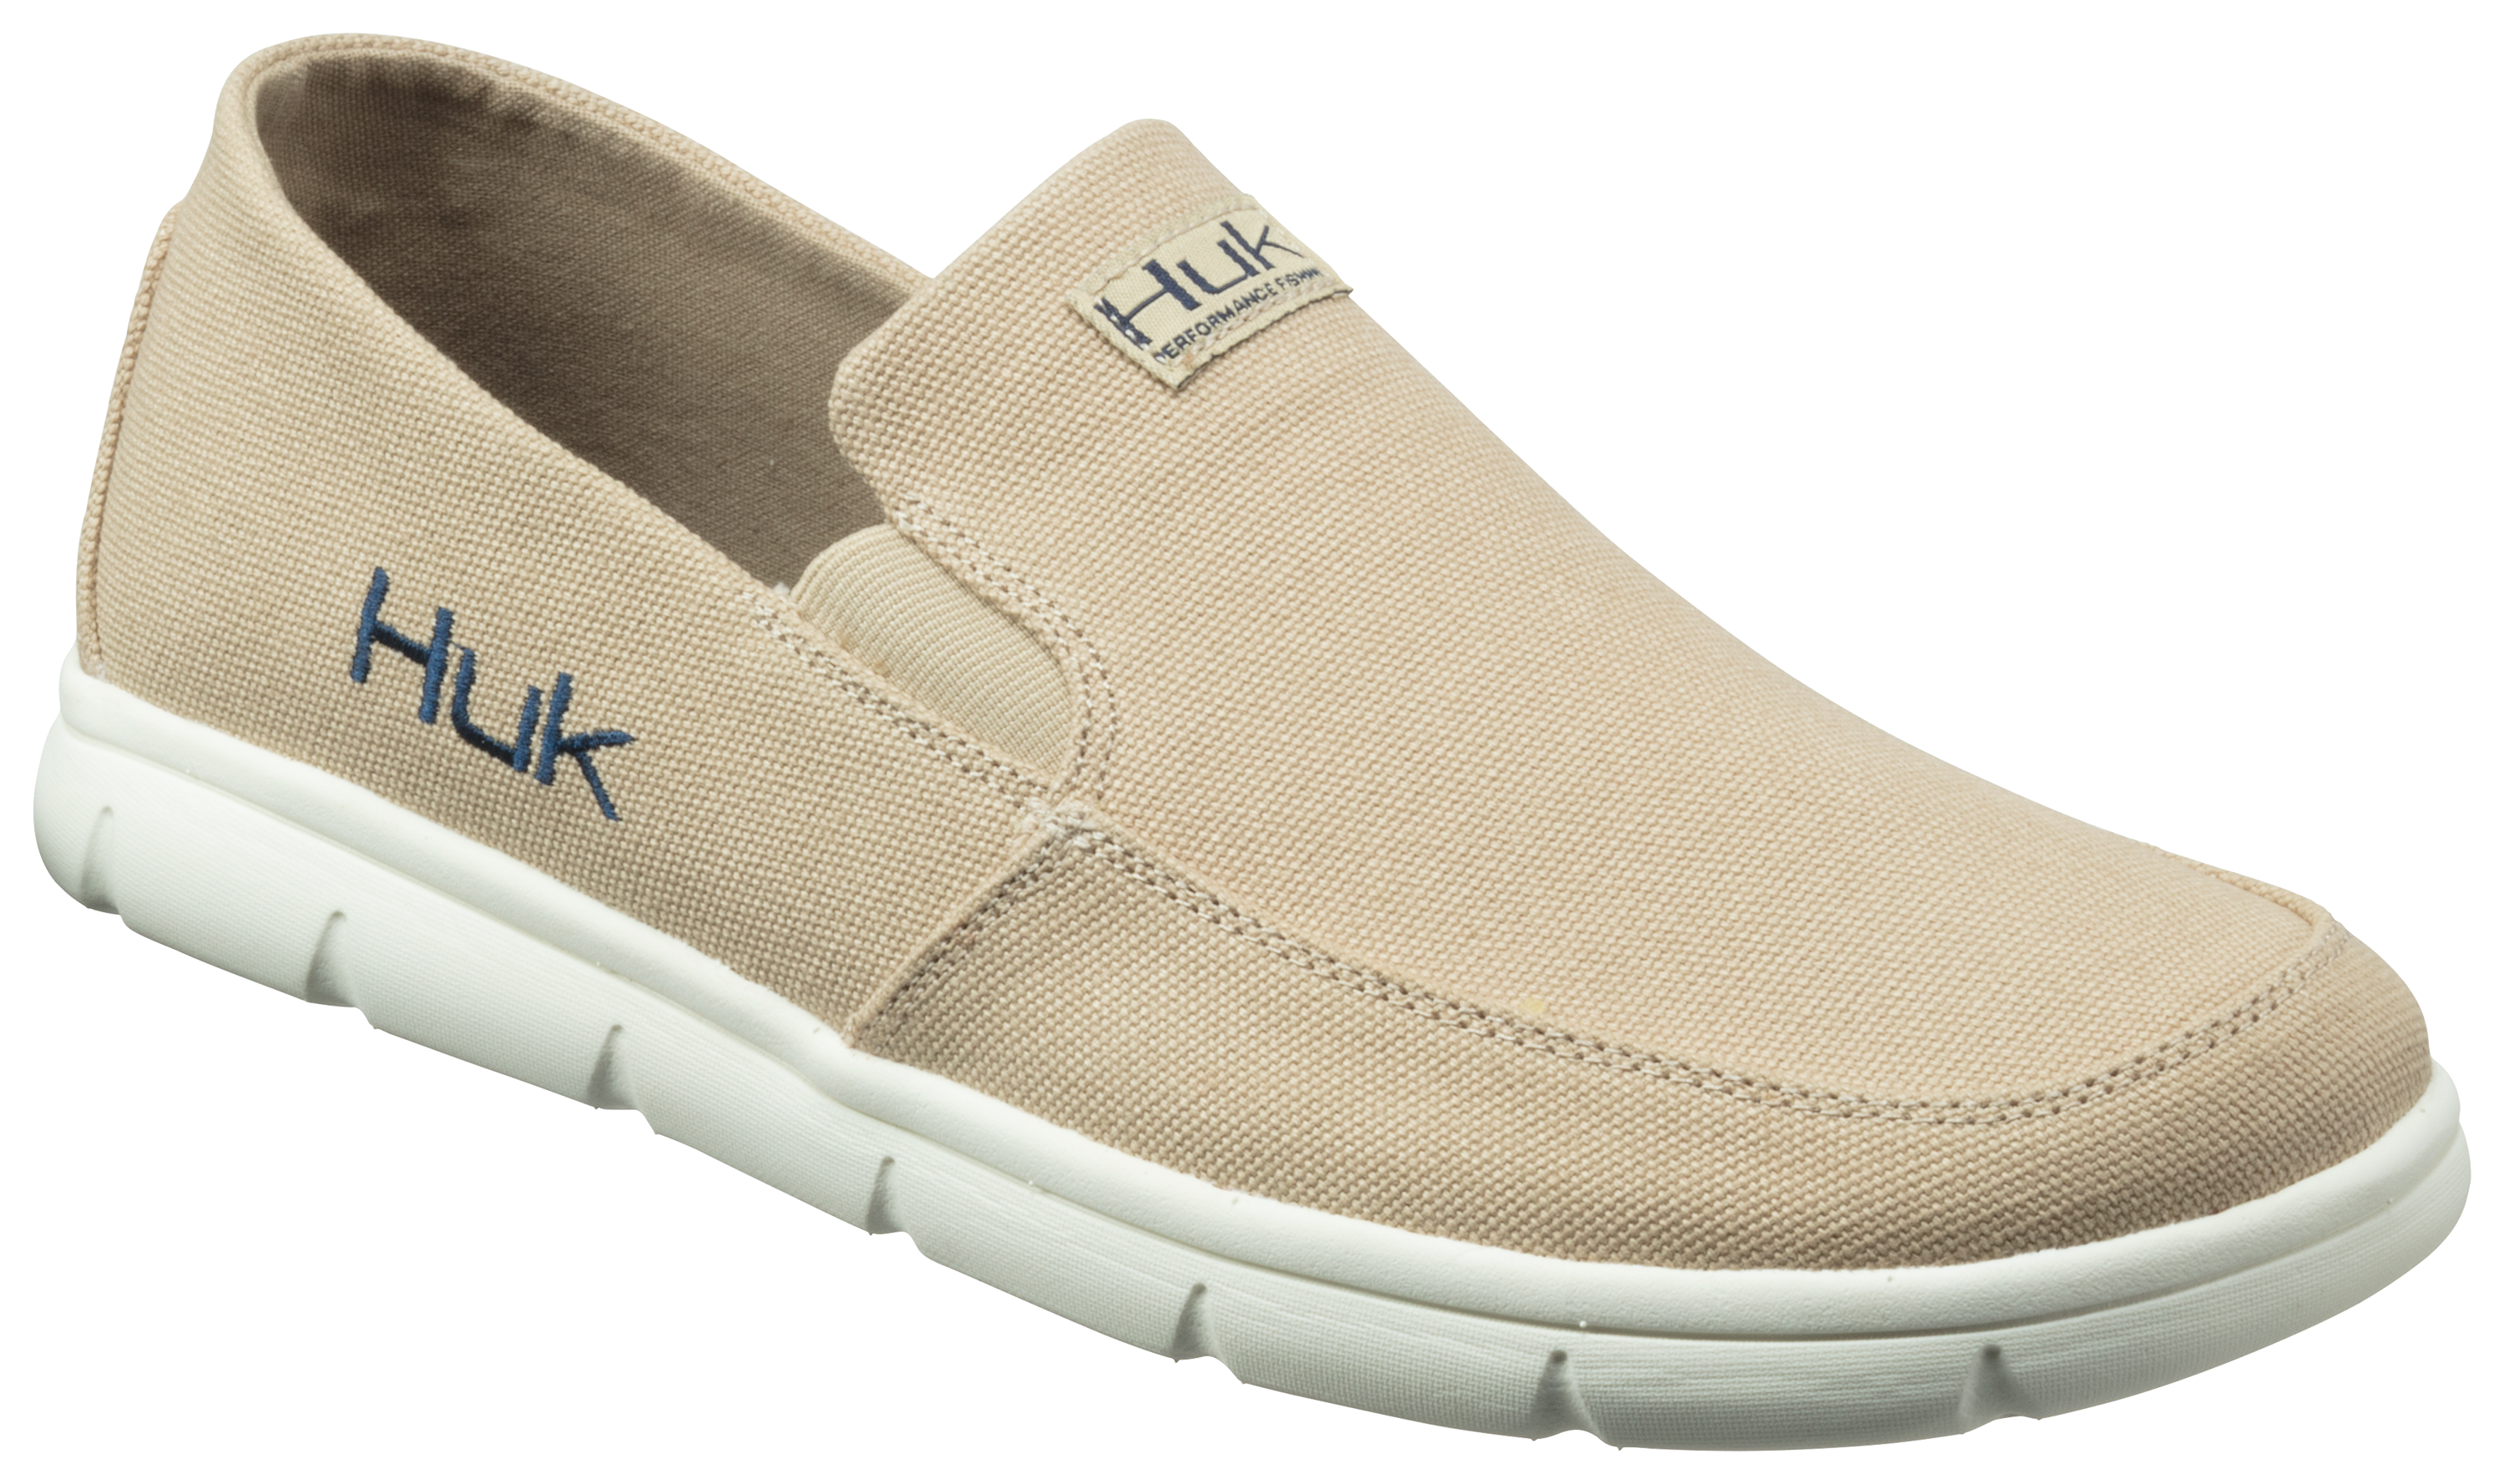 HUK Performance Brewster Slip-on Wet Traction Fishing Deck Shoes mens Boat  Shoe